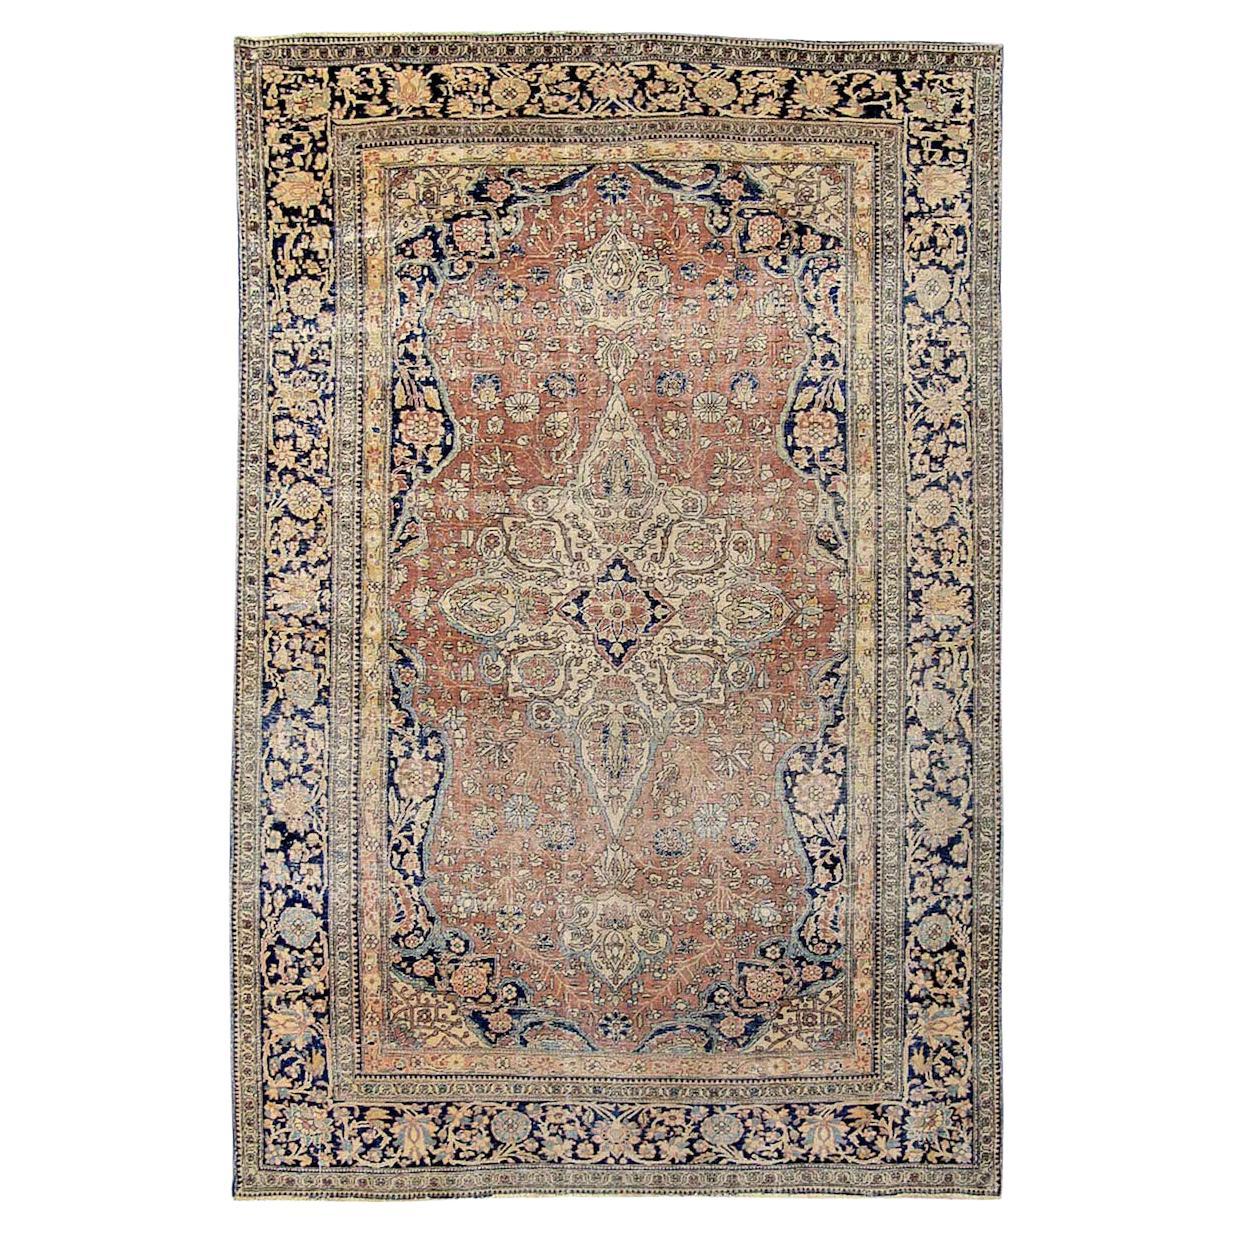 Antique Persian Mohtesham Kashan Rug, Late 19th Century For Sale